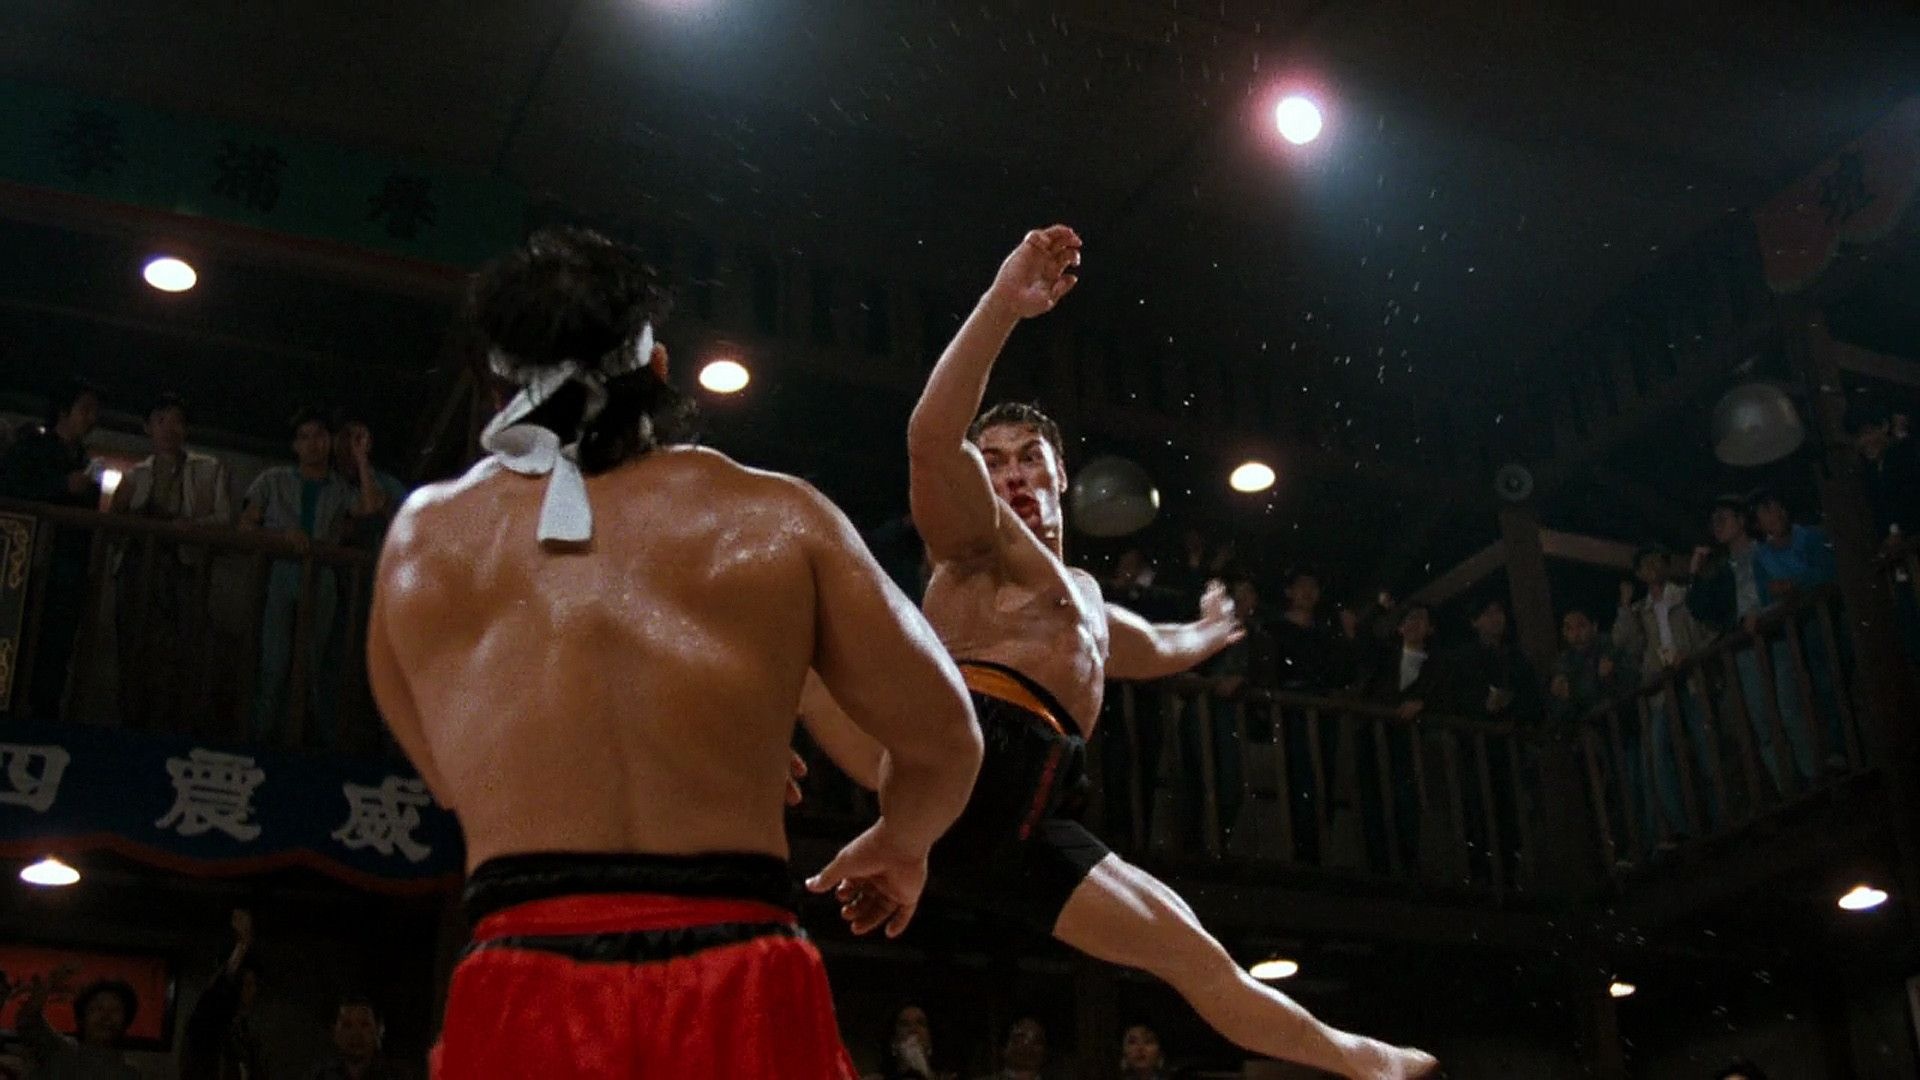 Bloodsport, Exciting wallpapers, Action-packed backgrounds, Martial arts imagery, 1920x1080 Full HD Desktop